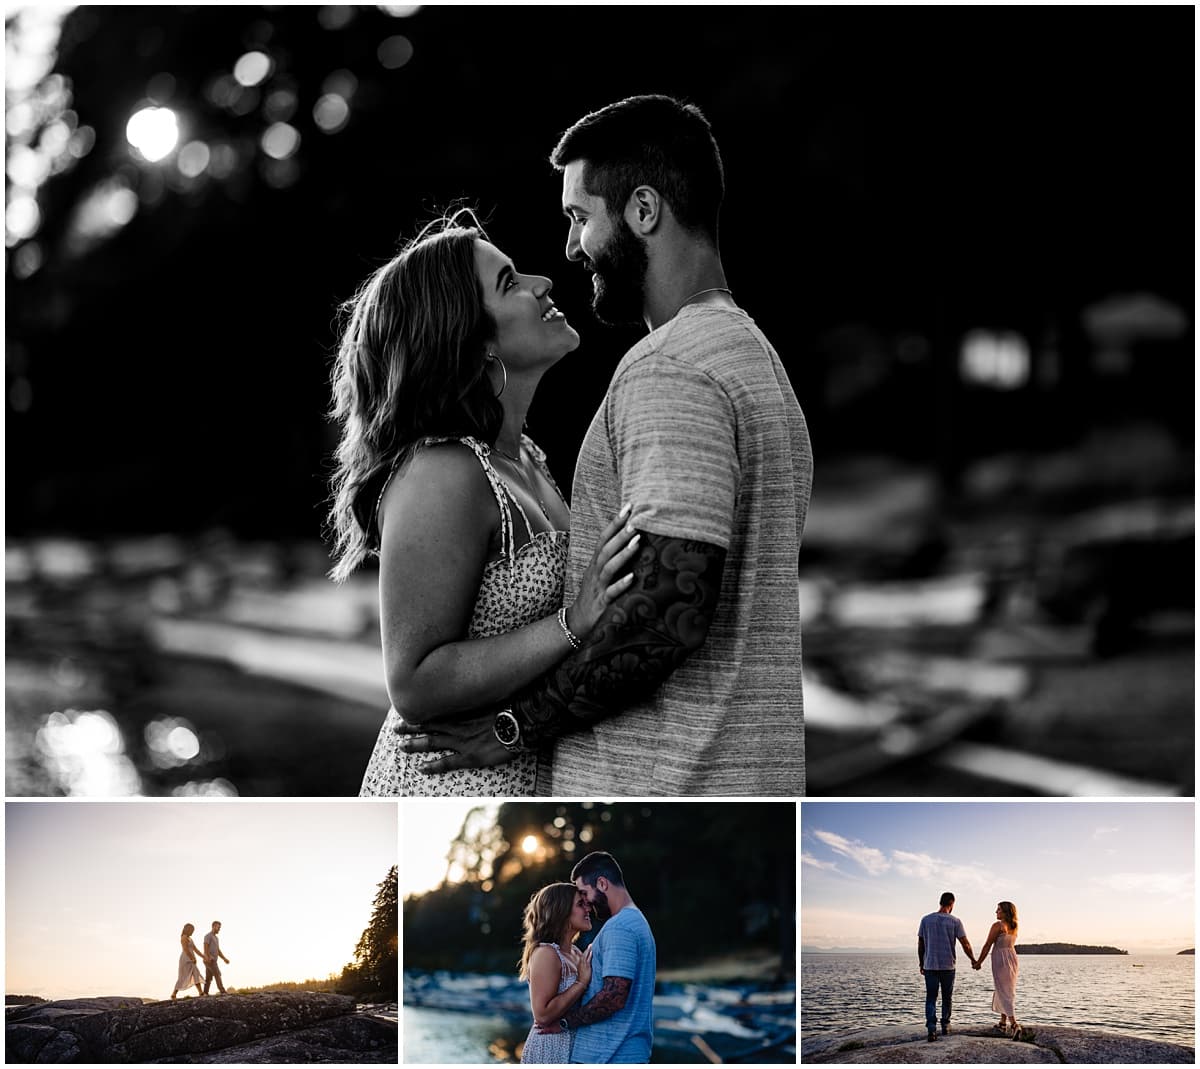 beautiful seaside engagement photos taken at Snicket Park in Sechelt, BC by Fresh Air Photography